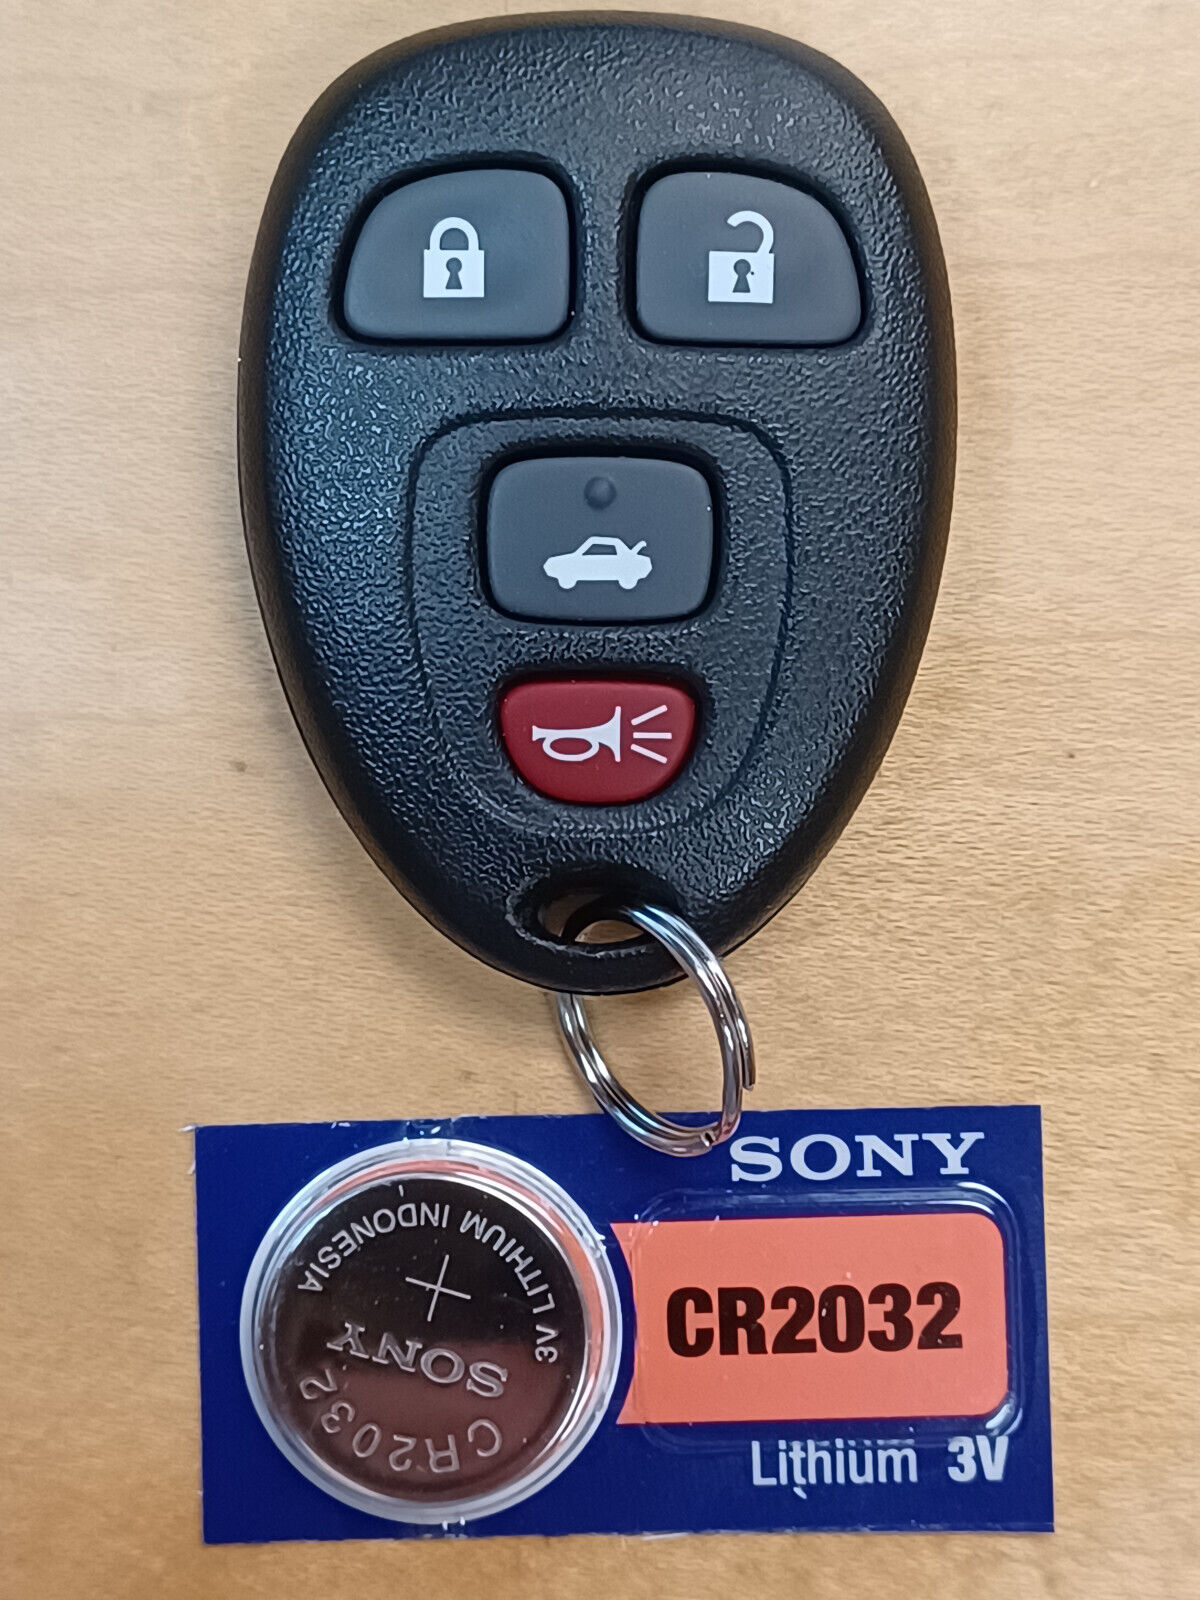 Genuine OEM Button GM FOB Remote 15252034 5927408 NEEDS TO BE PROGRAMMED  eBay